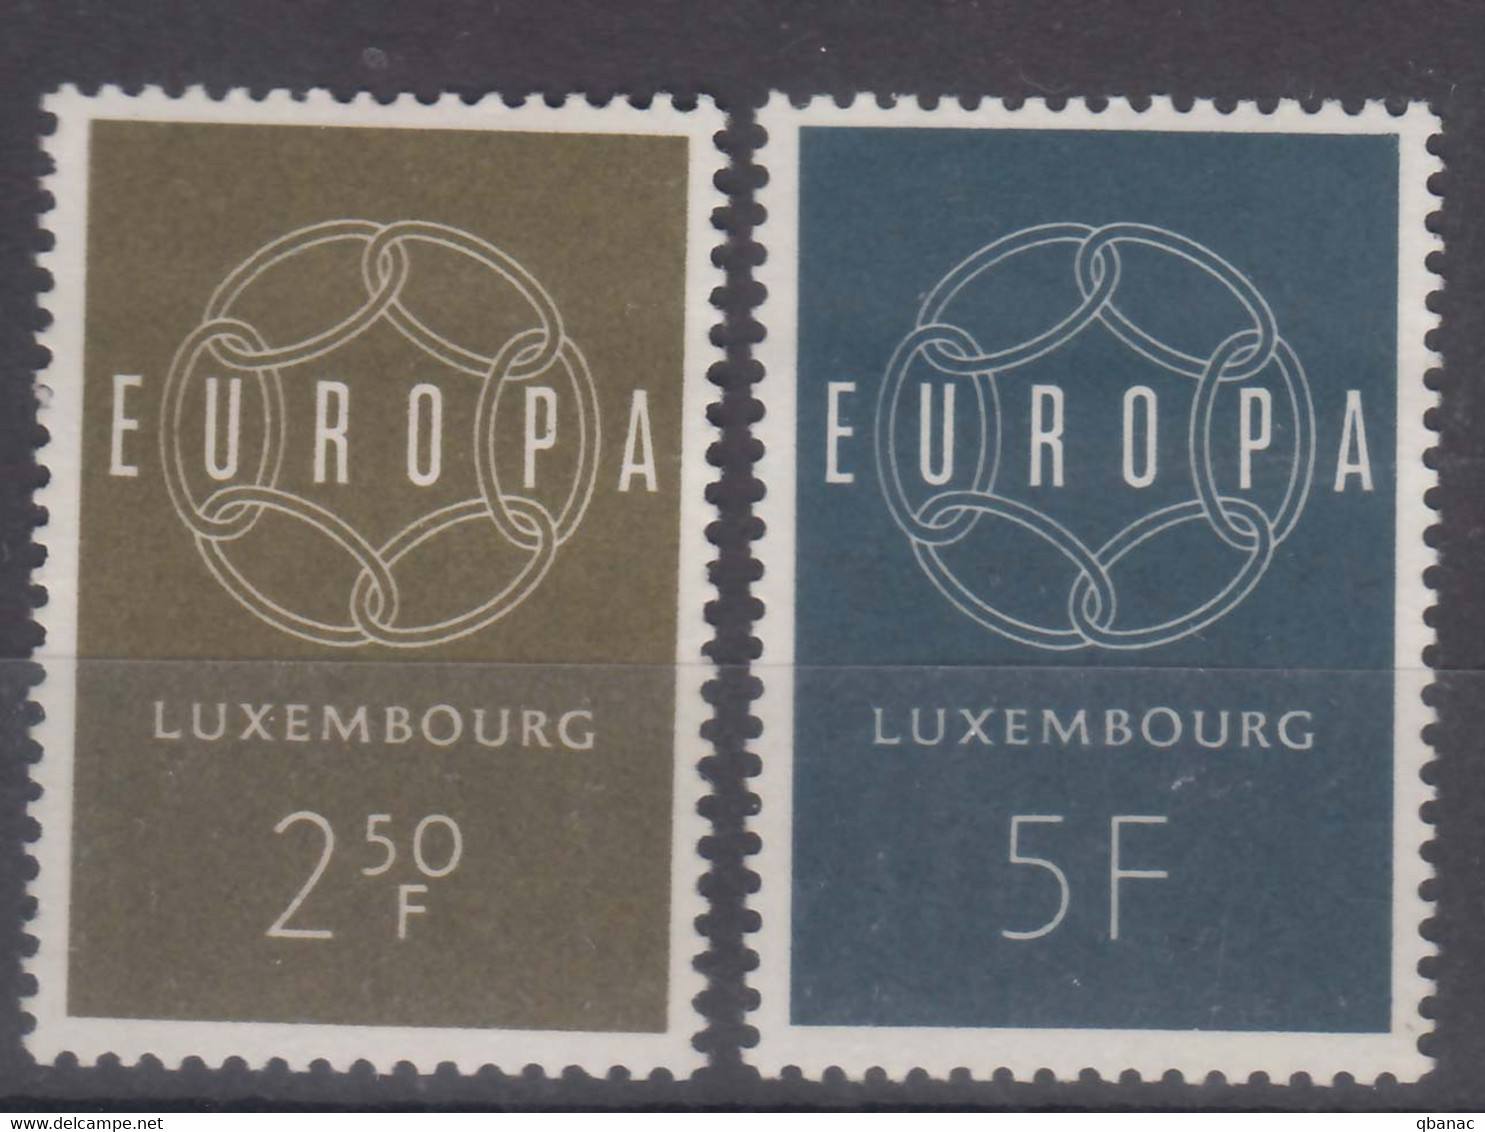 Luxembourg 1959 Mint Never Hinged - 1959